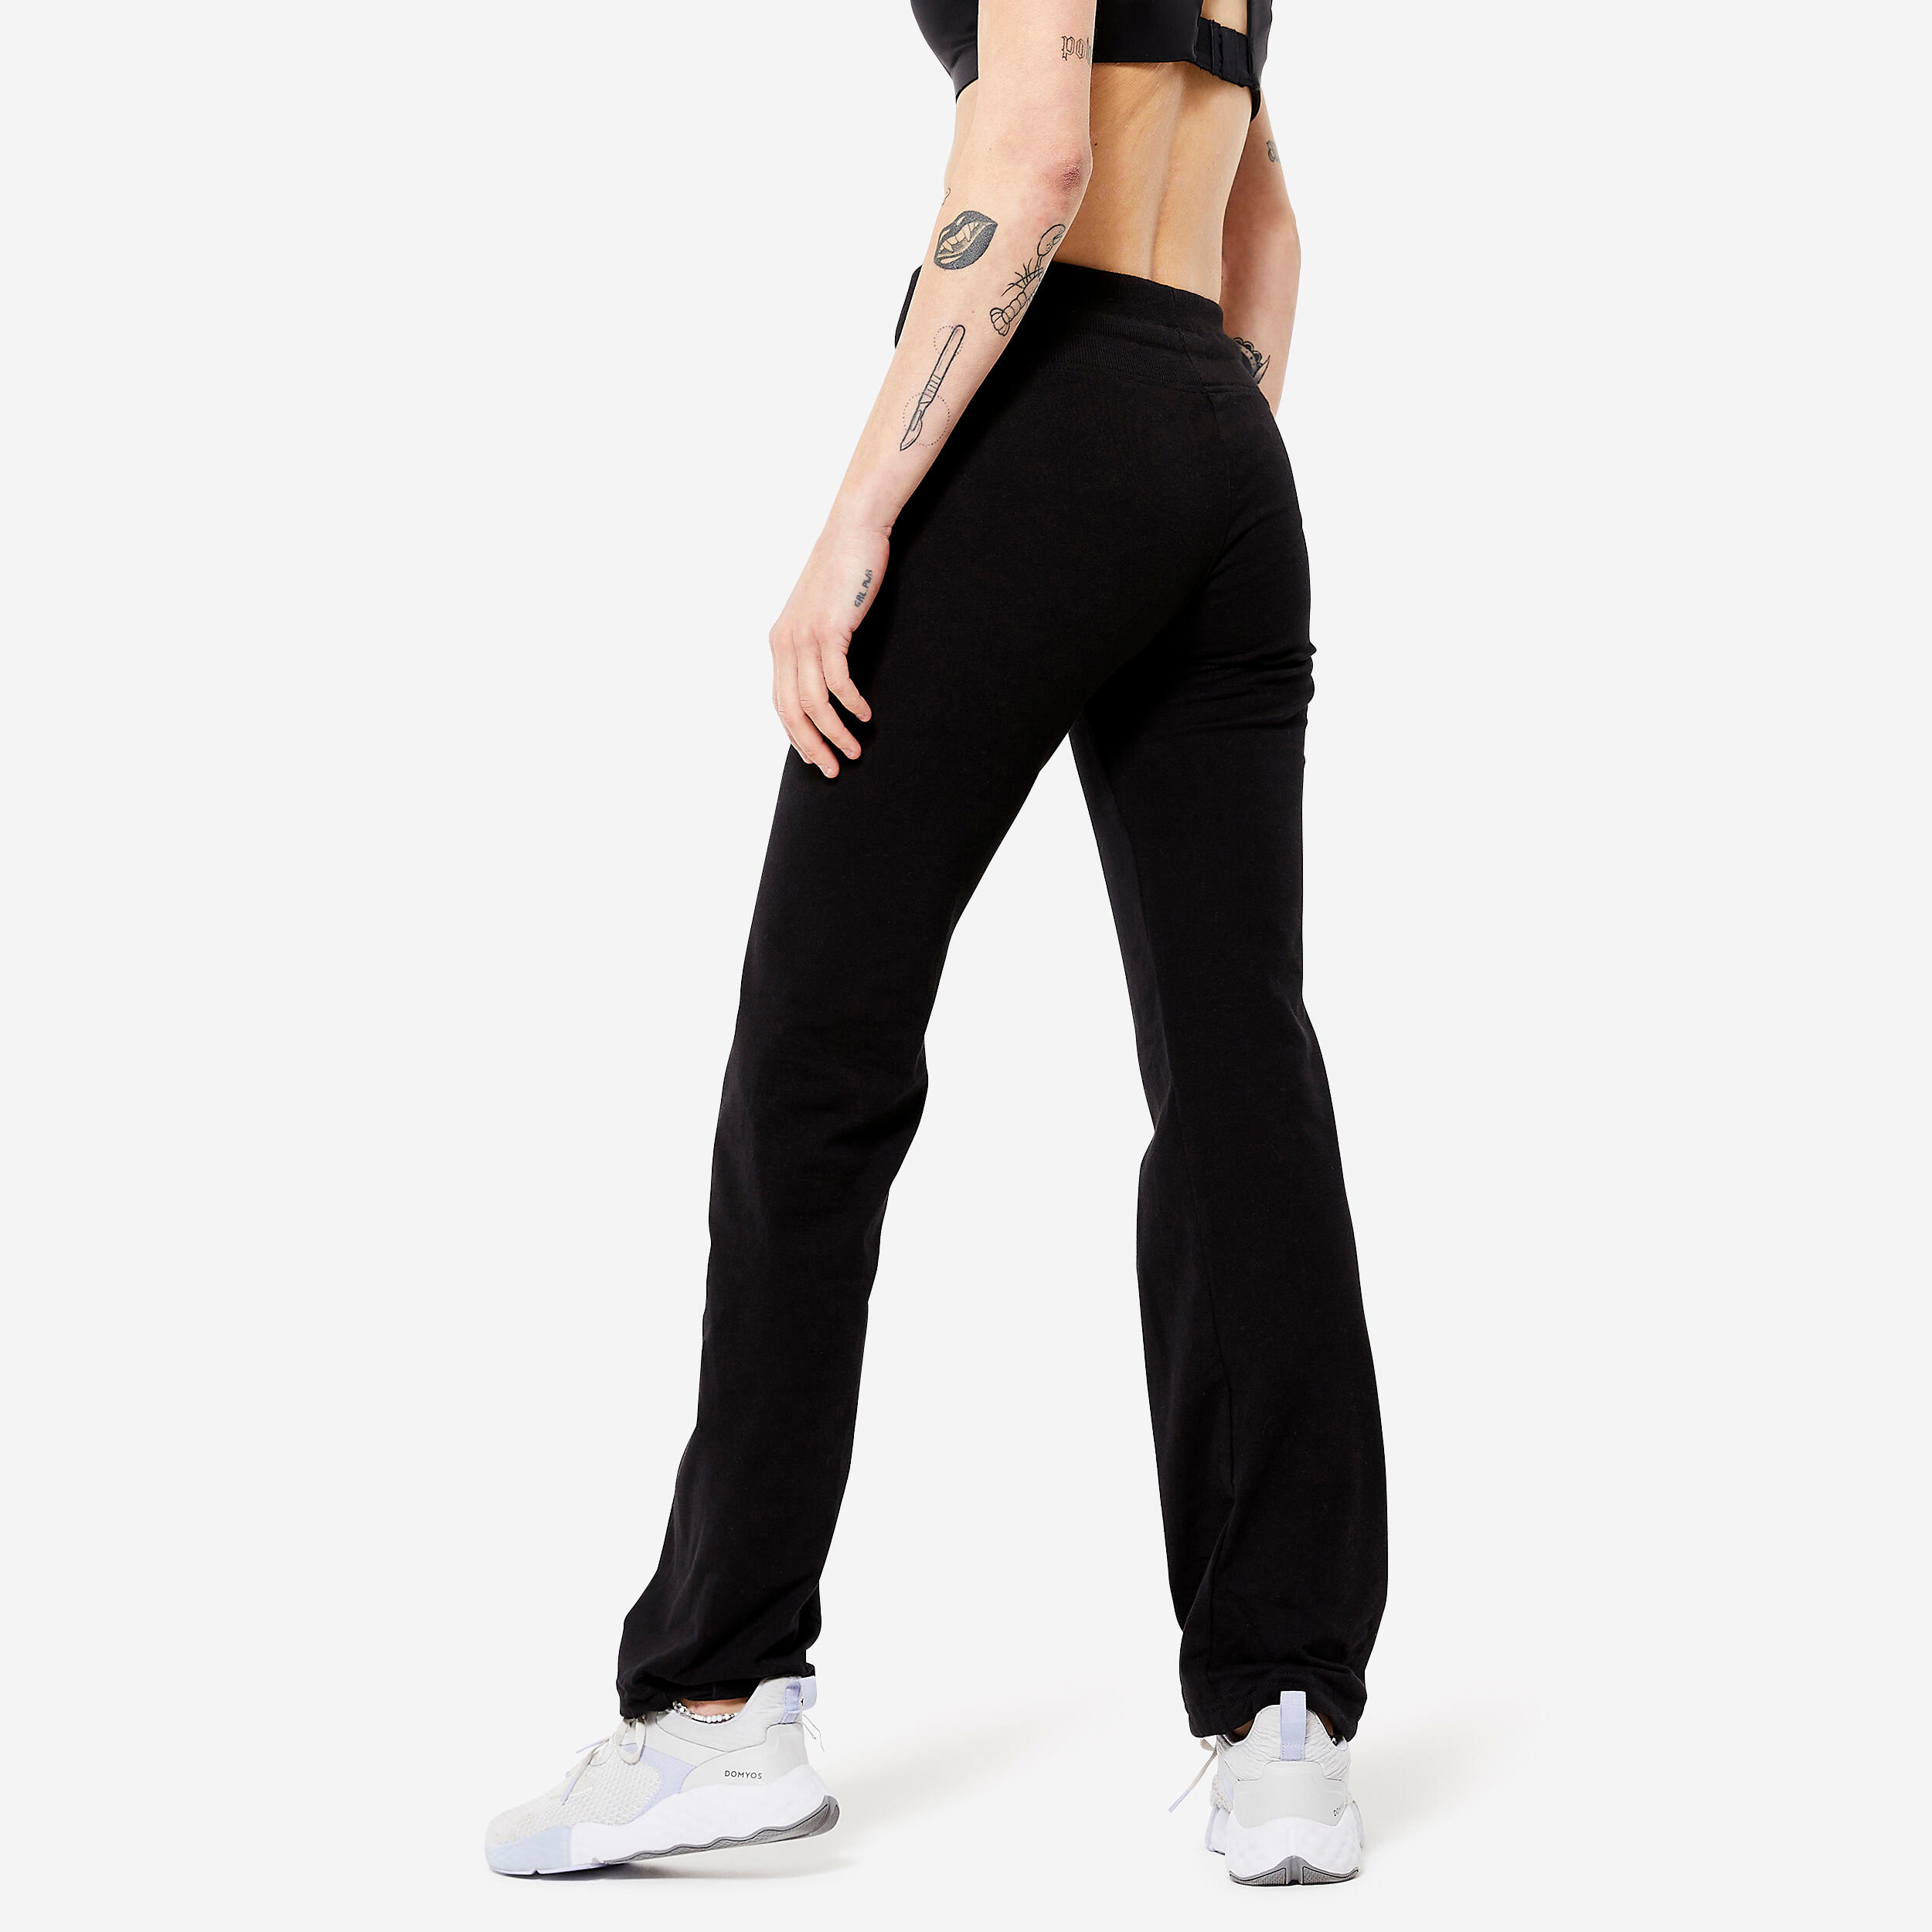 Domyos by Decathlon Women Black Solid Slim-Fit Rapid-Dry Joggers :  Amazon.in: Clothing & Accessories